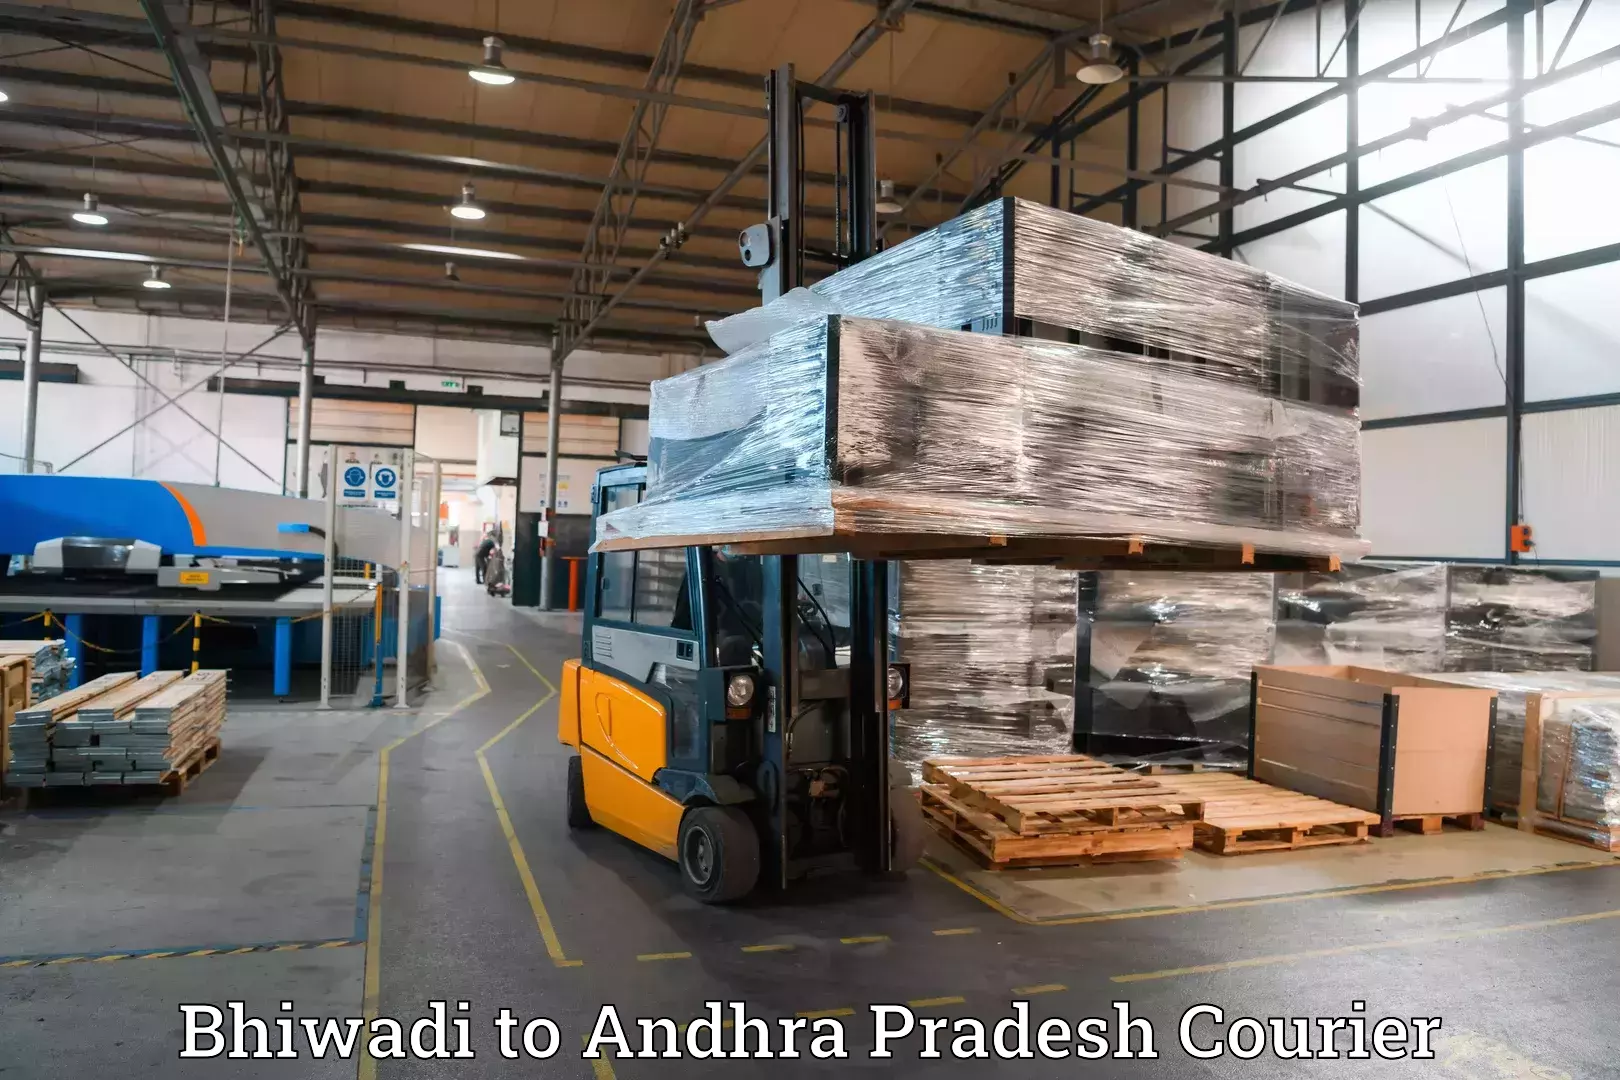 Baggage delivery technology Bhiwadi to Sri City